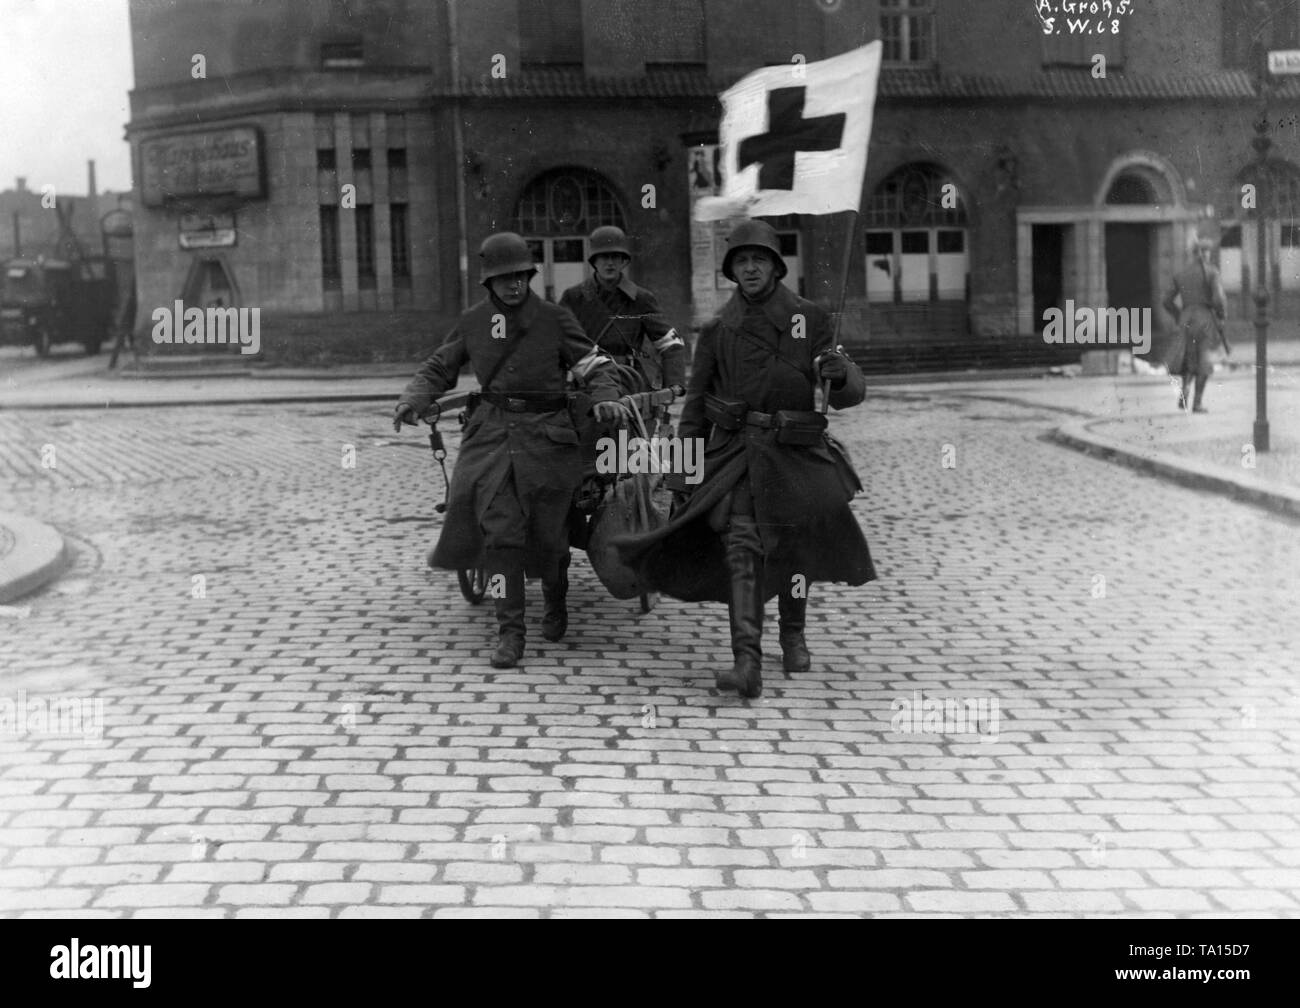 Paramedics of the government-loyal troops bring an injured person to safety. During the January uprising, there were armed conflicts in the Berlin Zeitungsviertel (newspaper quarter) between left-wing revolutionaries and government-loyal Freikorps units. Stock Photo